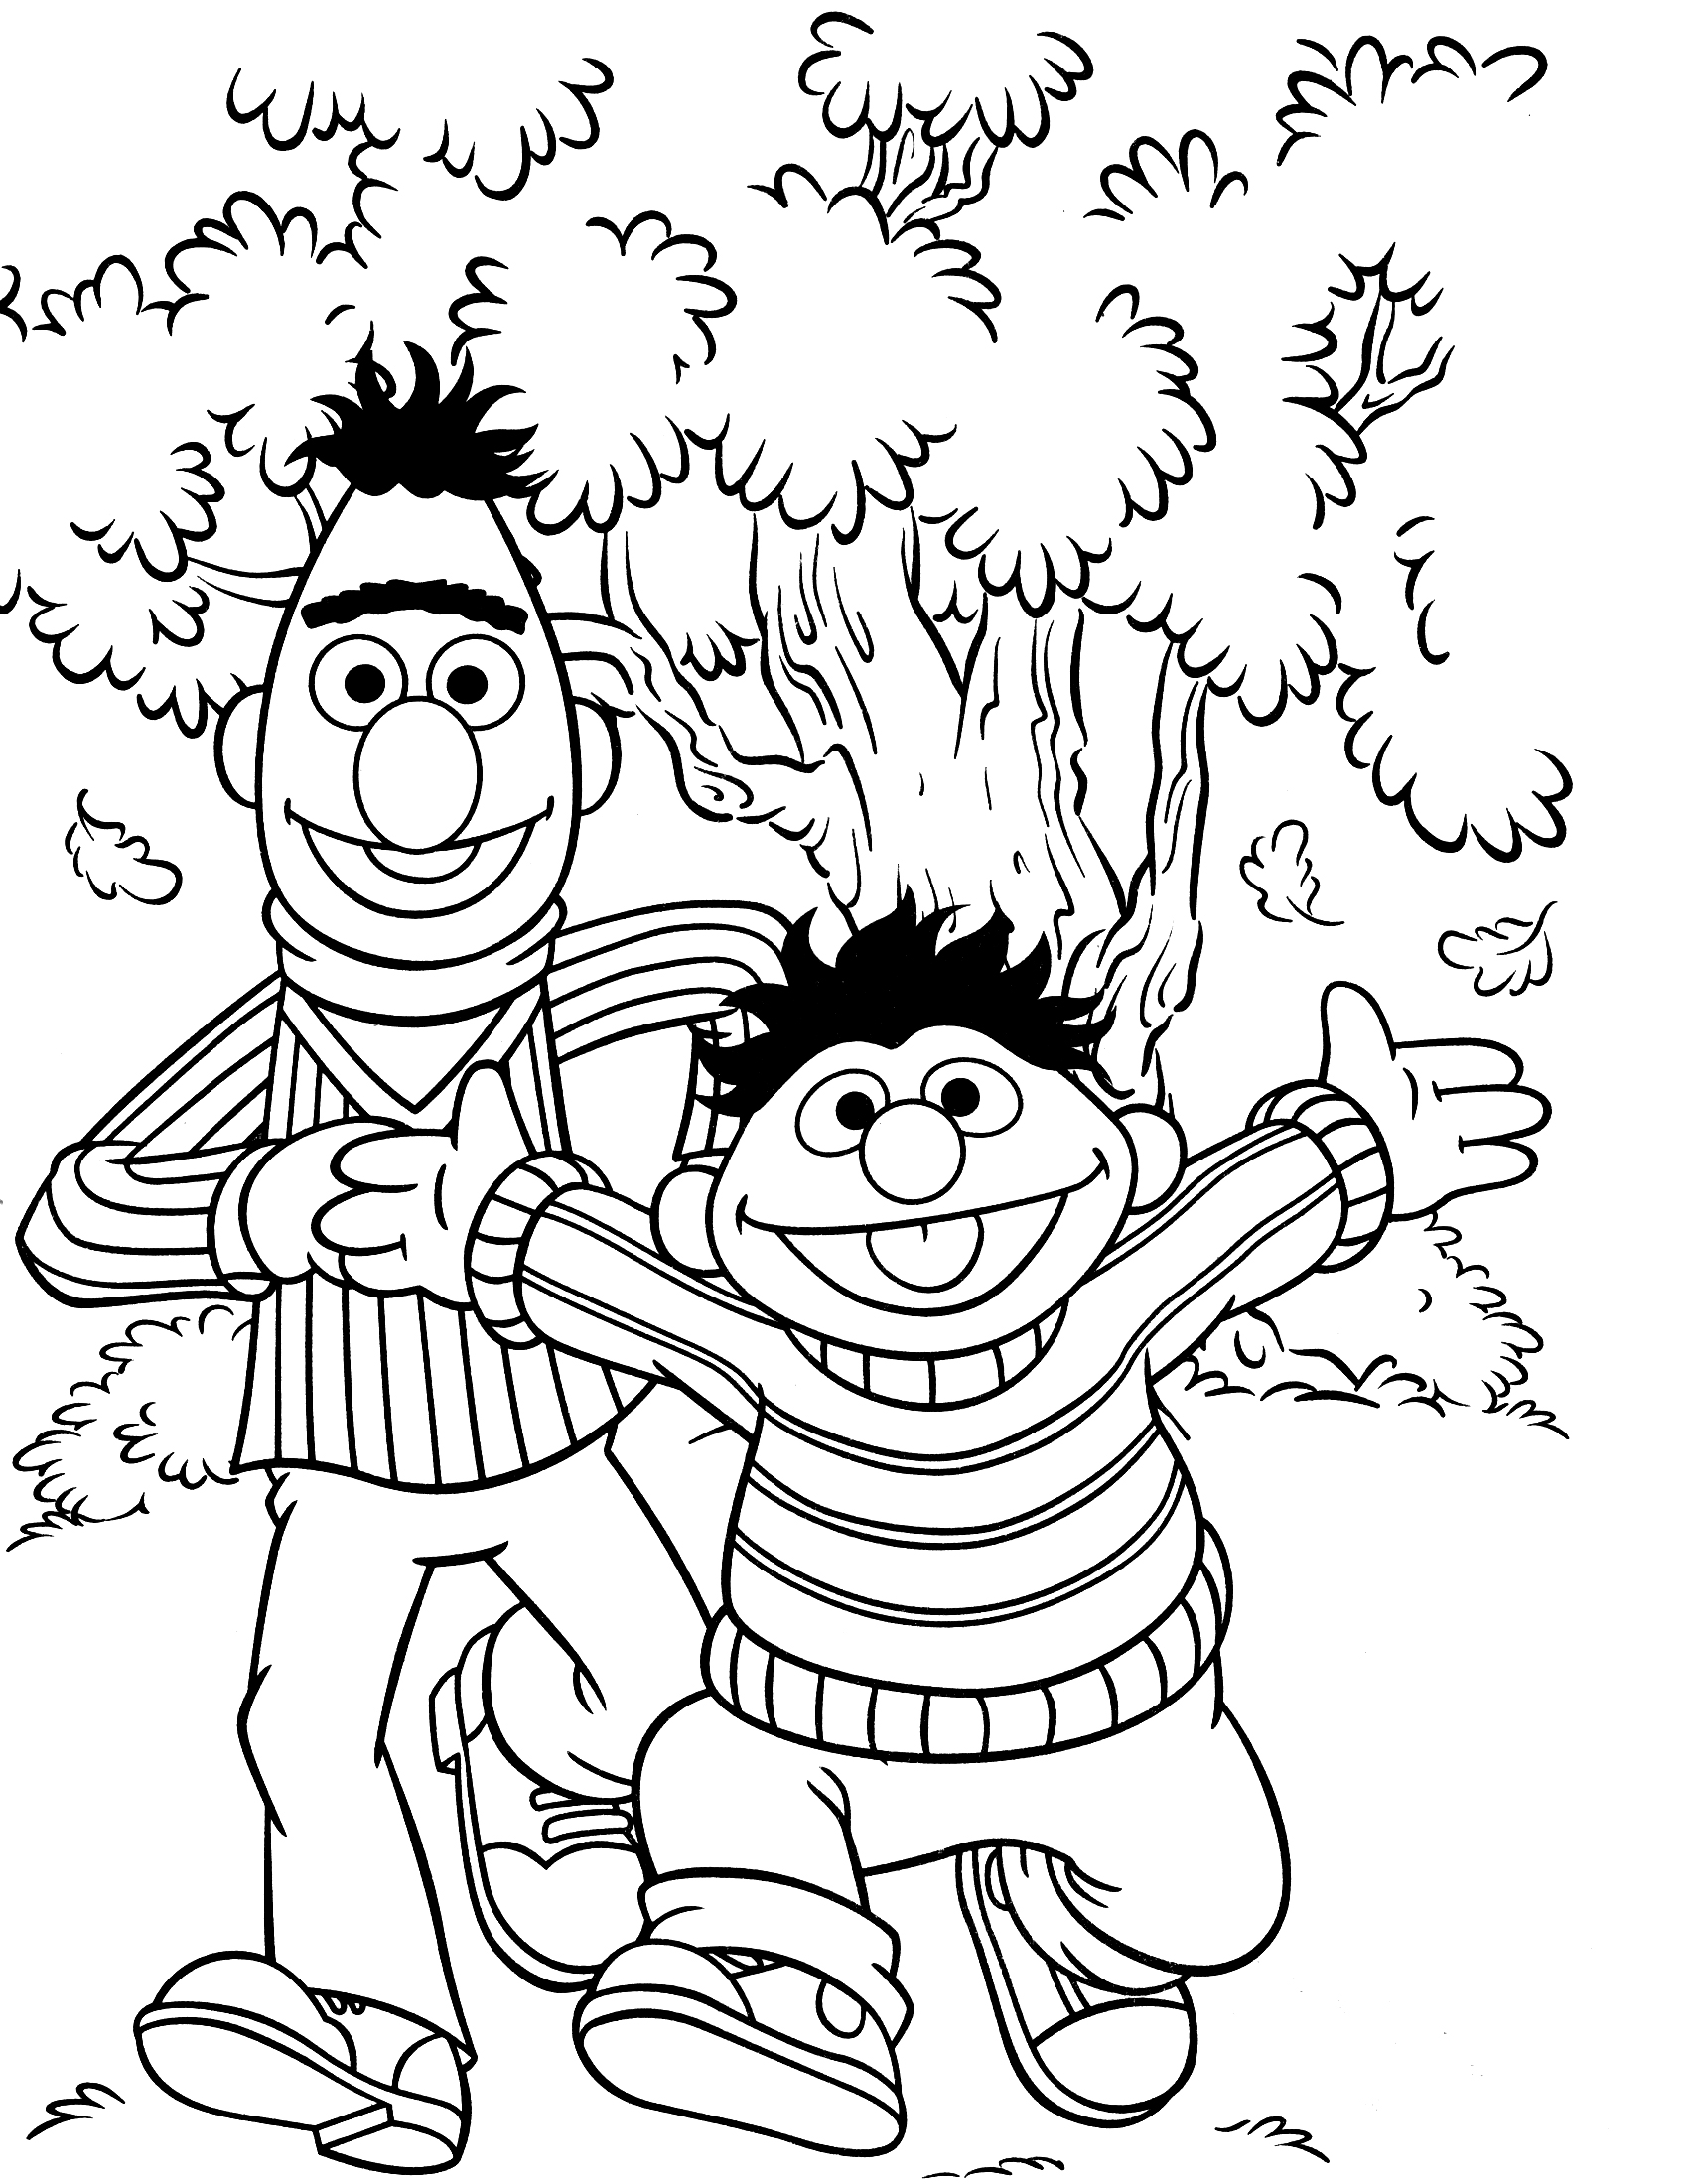 Coloring pages sesame street coloring pages free baby sheets